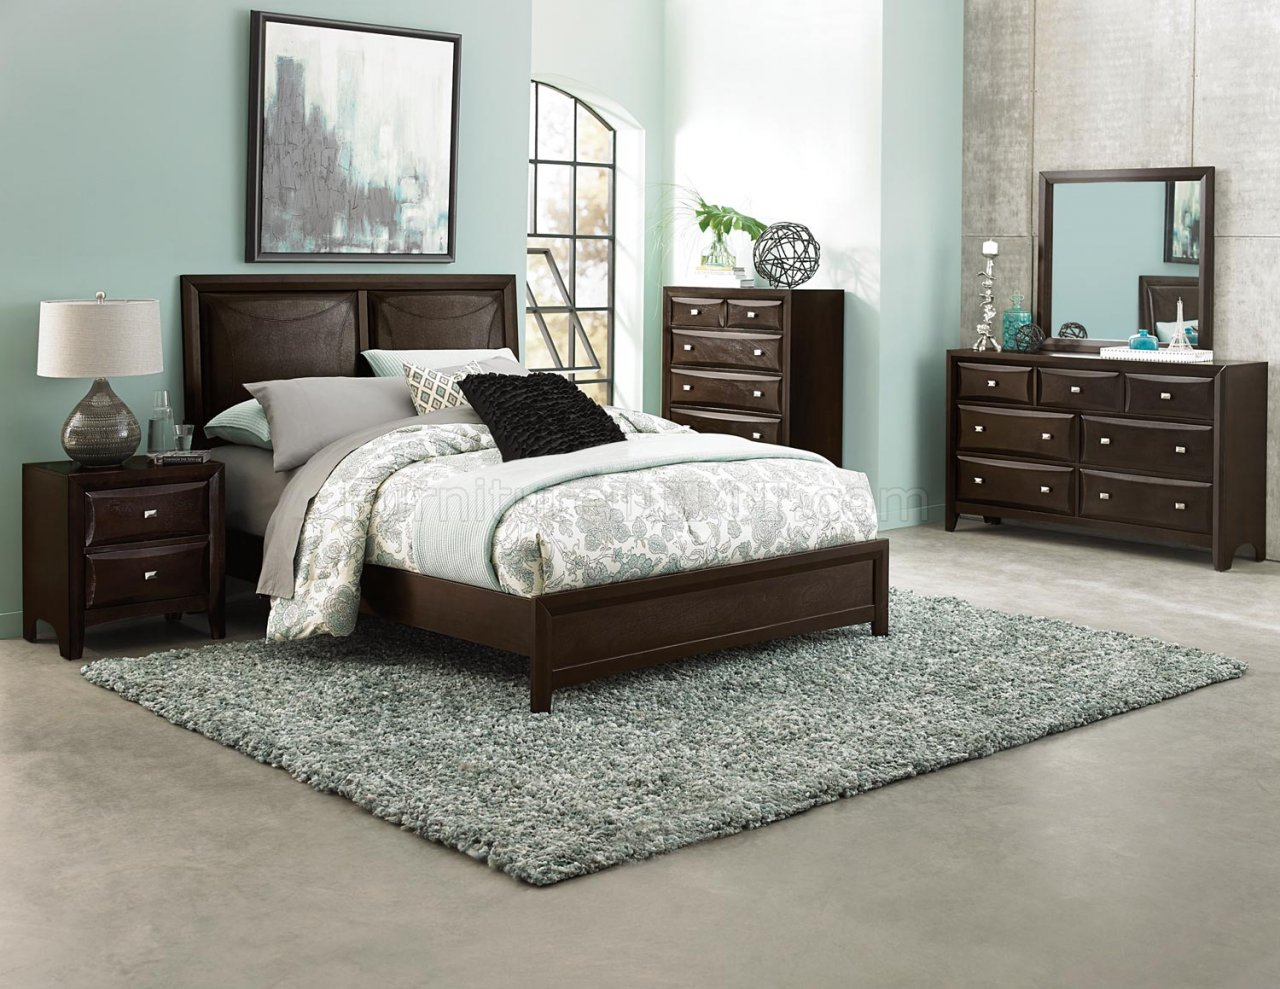 Summerlin Bedroom Set 1908 in Espresso by Homelegance w/Options - Click Image to Close